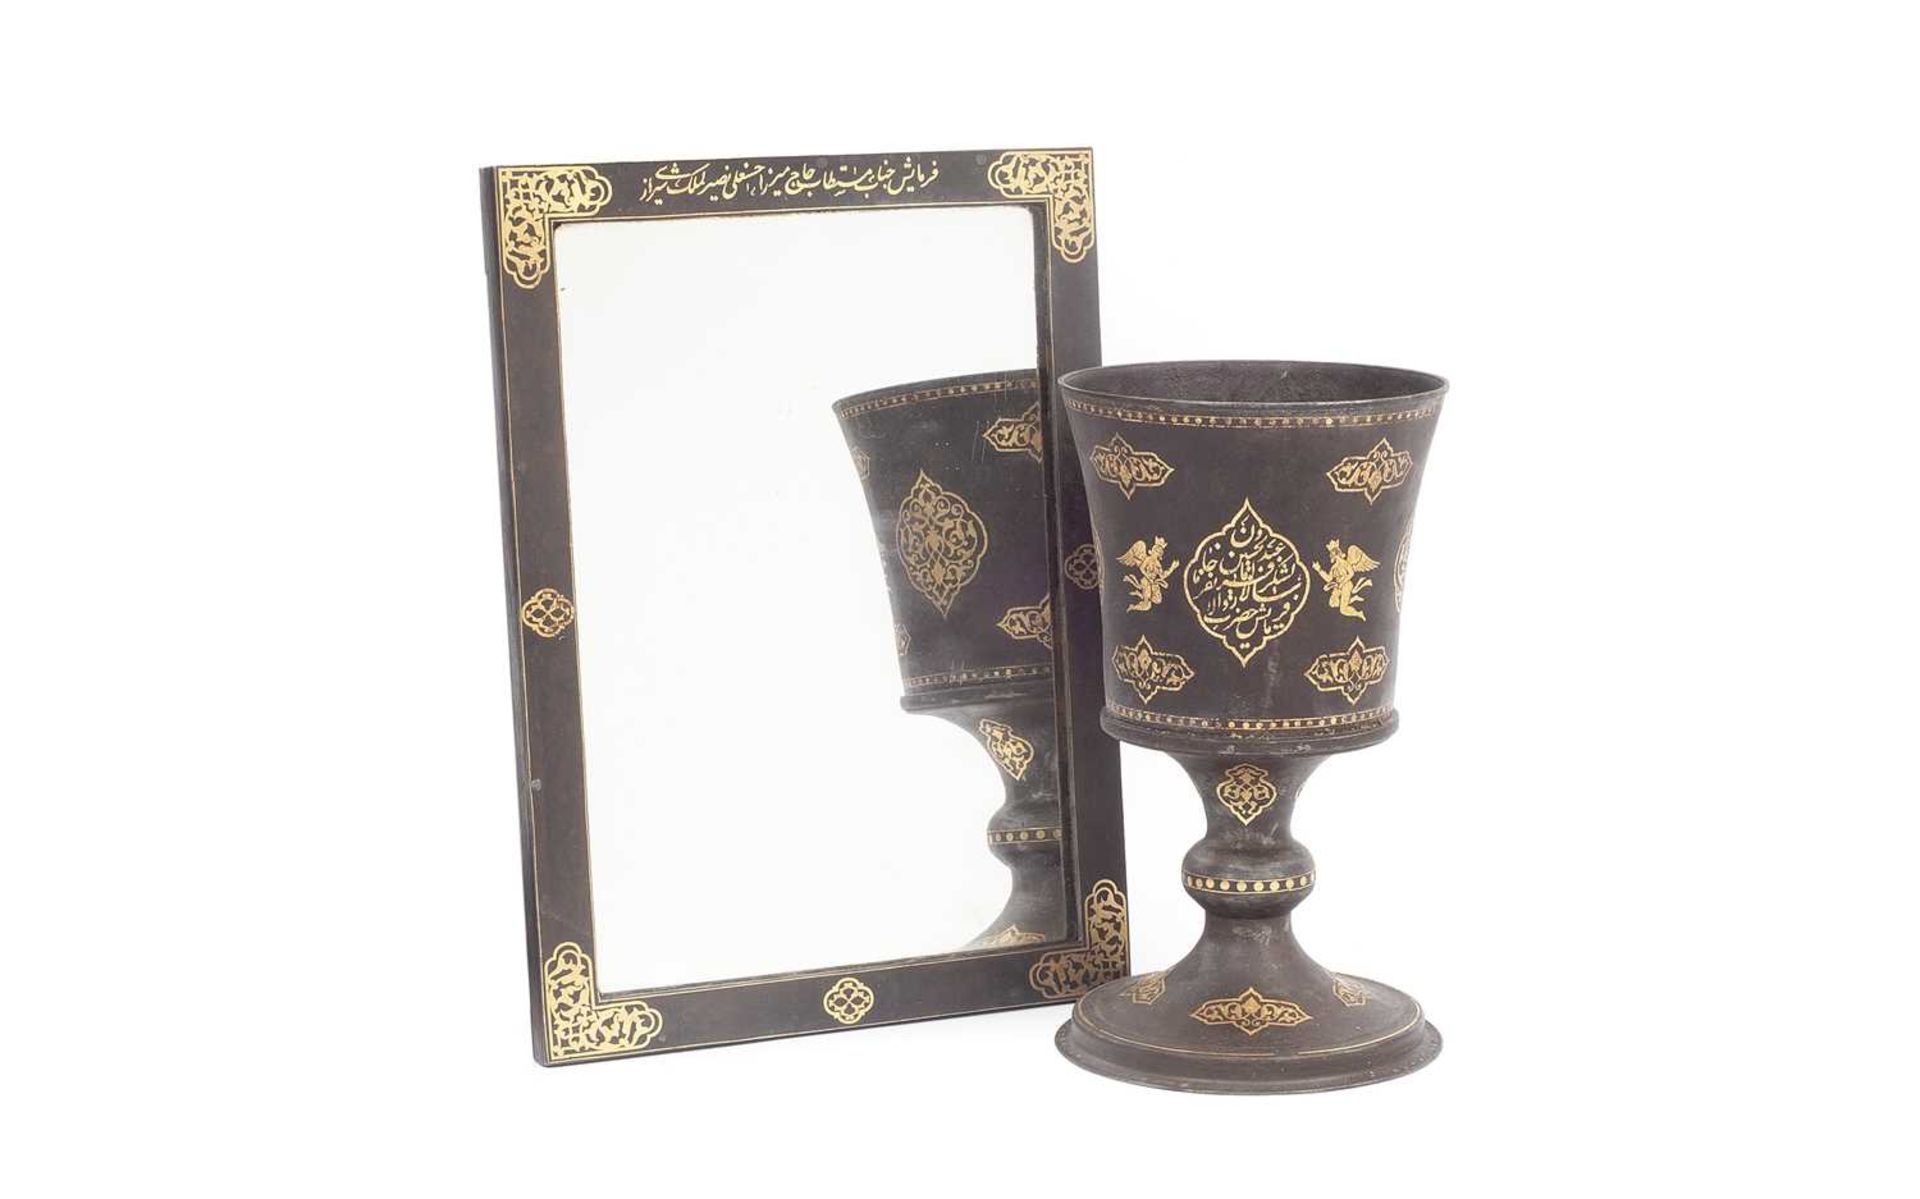 A GOLD DECORATED ISLAMIC GOBLET AND STAND